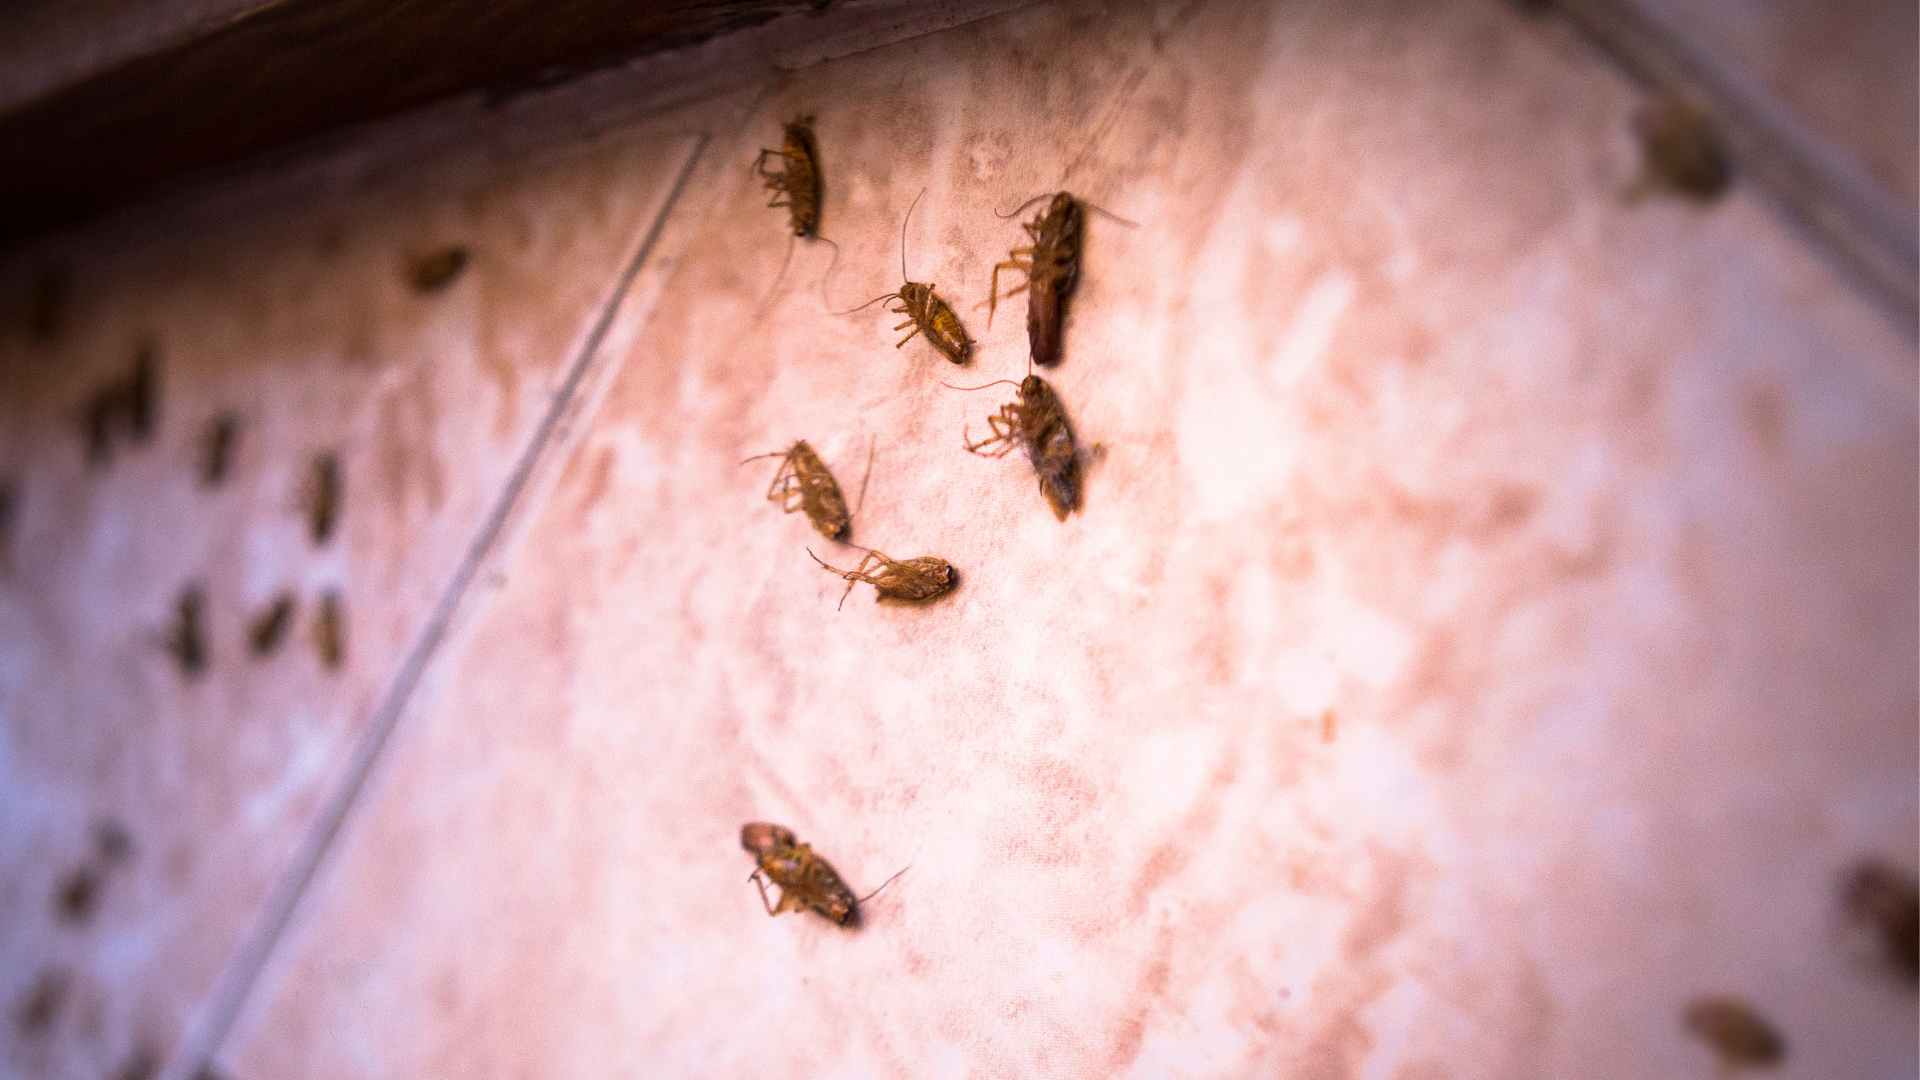 Do Roaches Hate Light? Why the Swift Light Reaction?